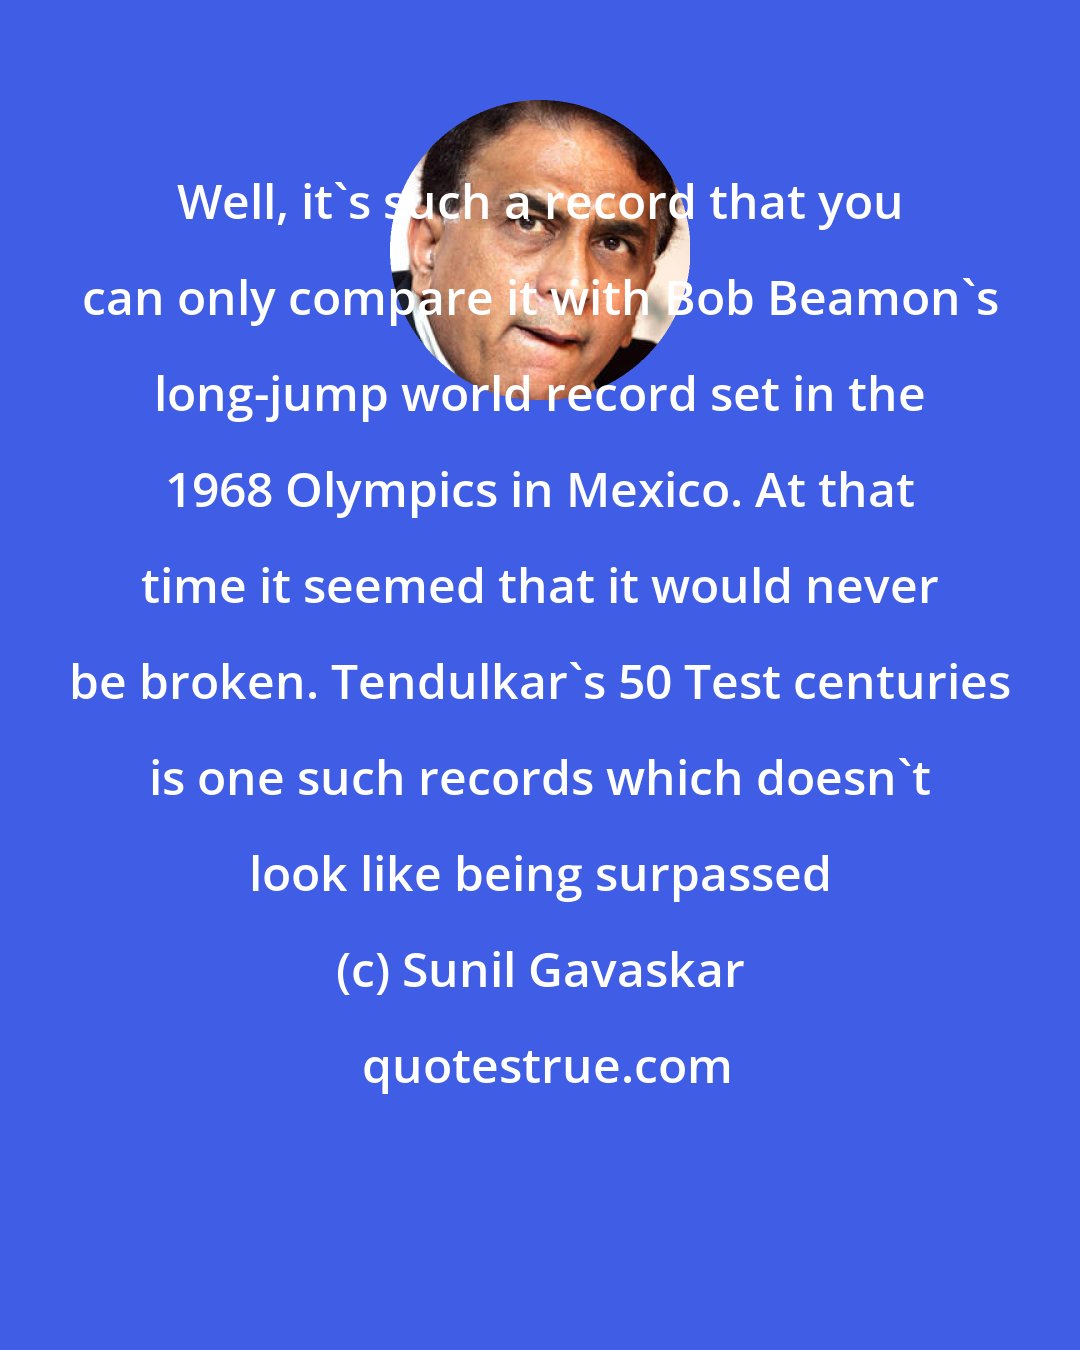 Sunil Gavaskar: Well, it's such a record that you can only compare it with Bob Beamon's long-jump world record set in the 1968 Olympics in Mexico. At that time it seemed that it would never be broken. Tendulkar's 50 Test centuries is one such records which doesn't look like being surpassed